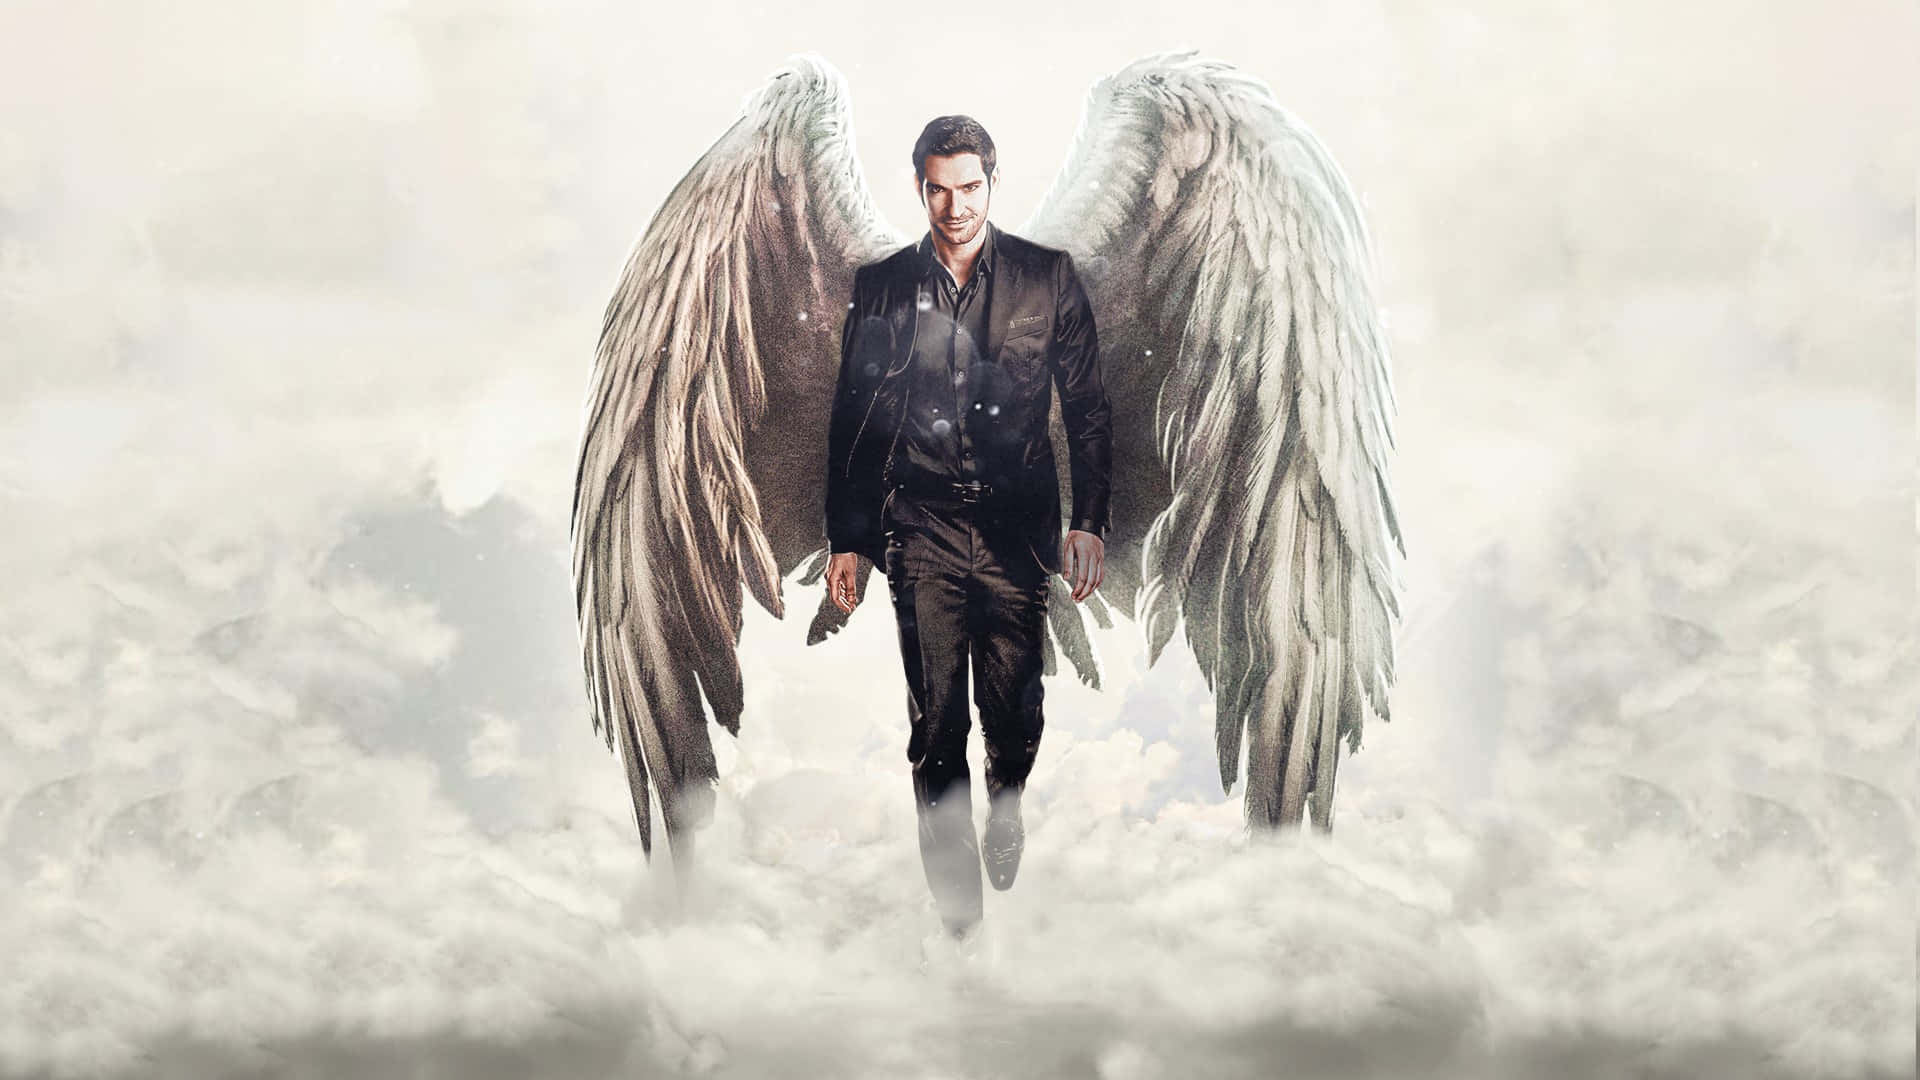 Enhance Your Spiritual Side with "Lucifer Wings" Wallpaper